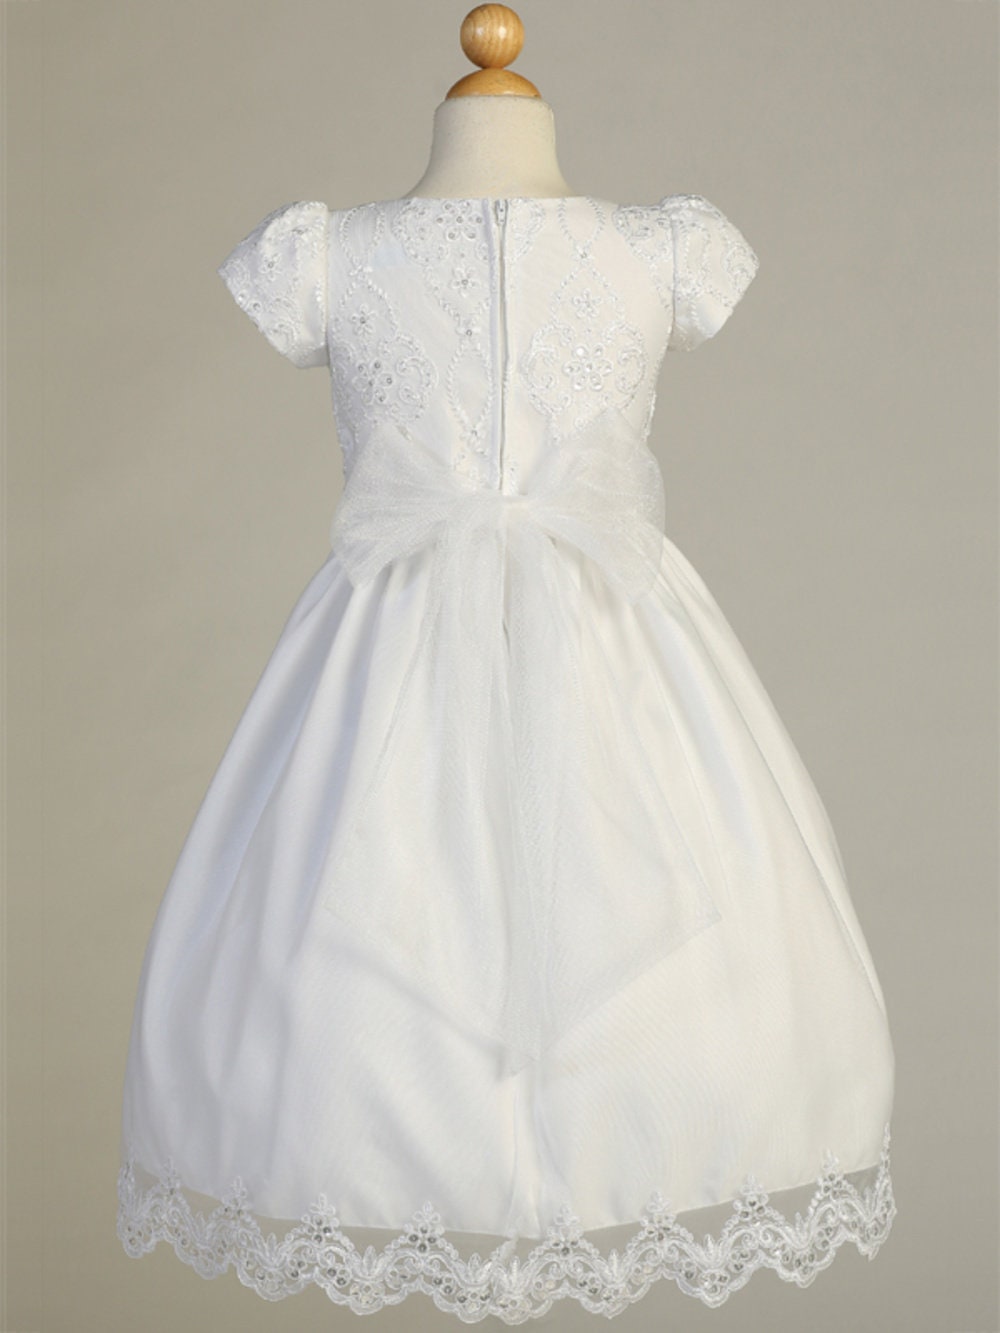 A view of the tulle skirt with corded and embroidered trim.